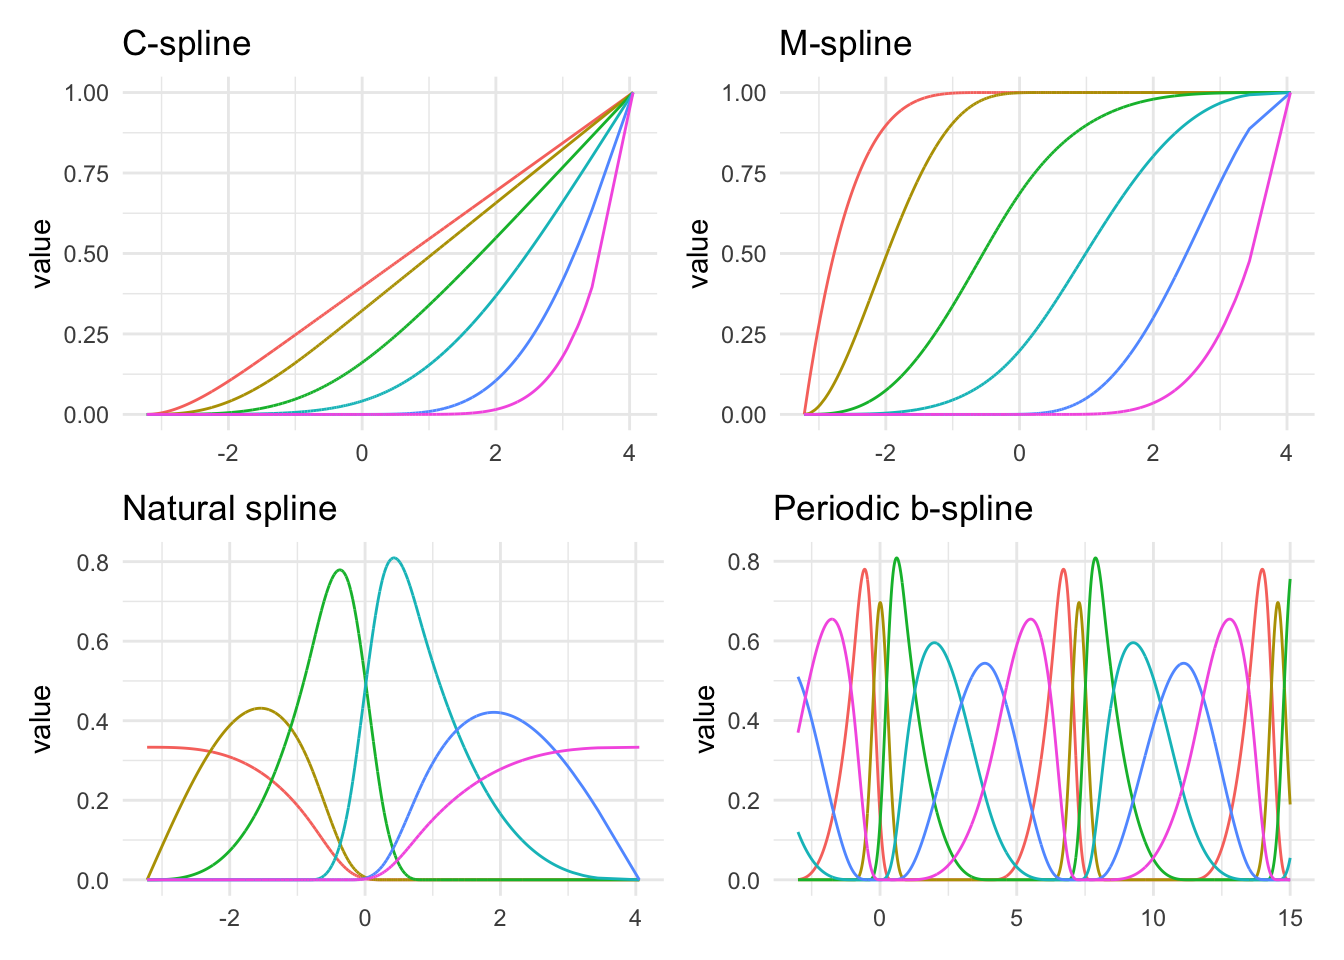 4 charts in a grid. Each represents a different type of spline. The C-splines here are all increasing at different rates of change. The M-splines appear to have a sigmoidal shape, starting at 0 and ending at 1. The natural splines look very similar to the basic splines we saw earlier. And the last chart shows a periodic b-spline. These splines are the same kind as earlier, but they have been modified to repeat at a specific interval.